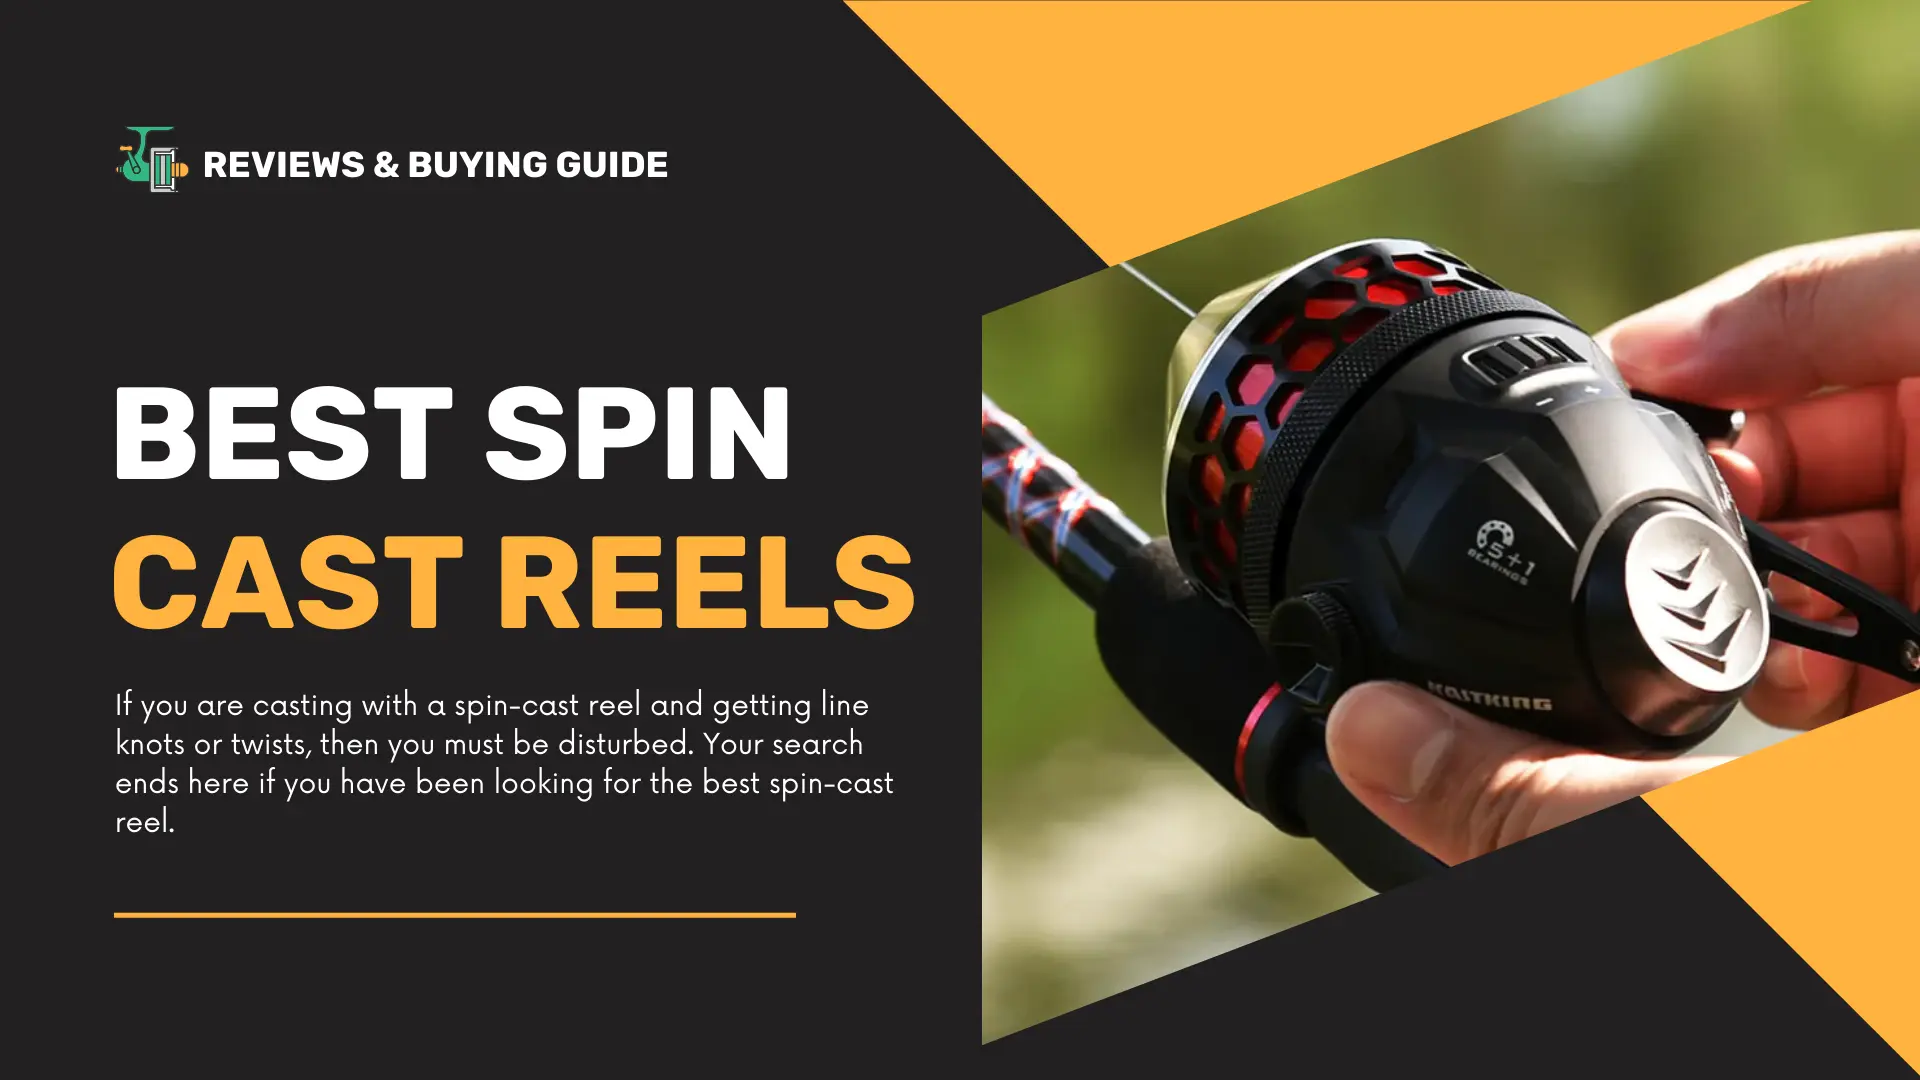 Best Spin Cast Reels